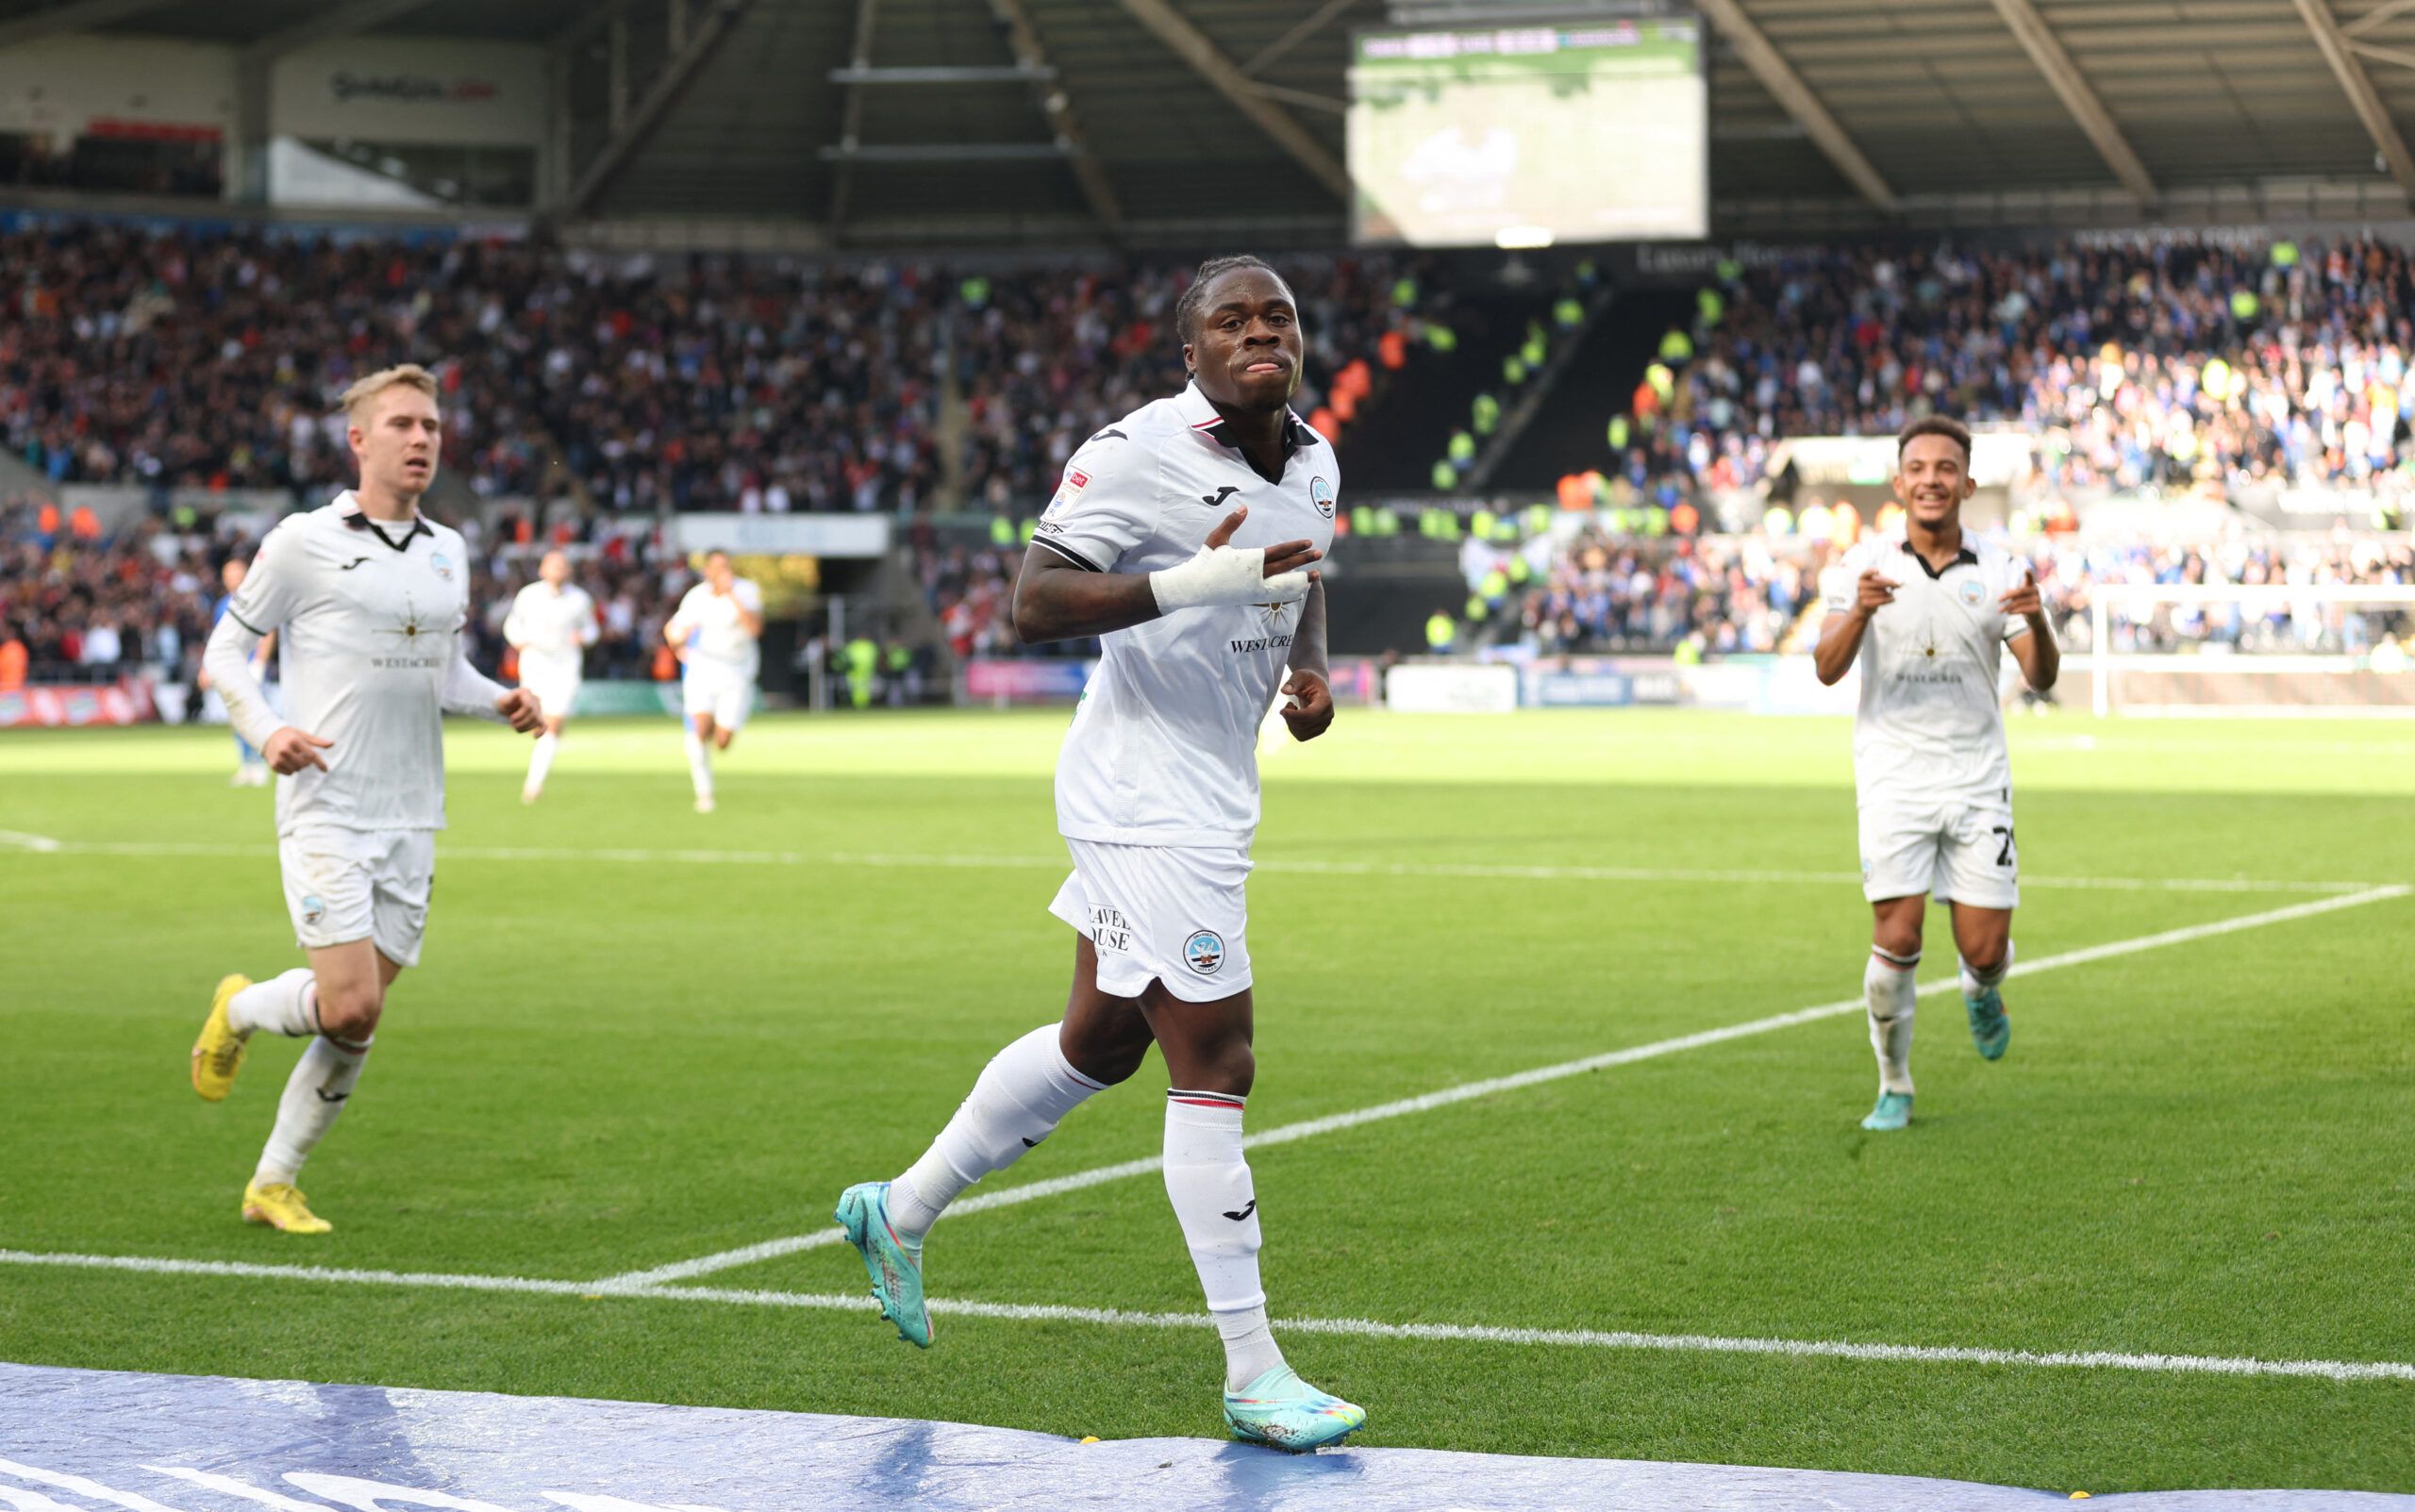 Soccer Football - Championship - Swansea City v Cardiff City - Swansea.com Stadium, Swansea, Britain - October 23, 2022 Swansea City's Michael Obafemi celebrates scoring their second goal Action Images/Matthew Childs EDITORIAL USE ONLY. No use with unauthorized audio, video, data, fixture lists, club/league logos or 'live' services. Online in-match use limited to 75 images, no video emulation. No use in betting, games or single club /league/player publications.  Please contact your account repre